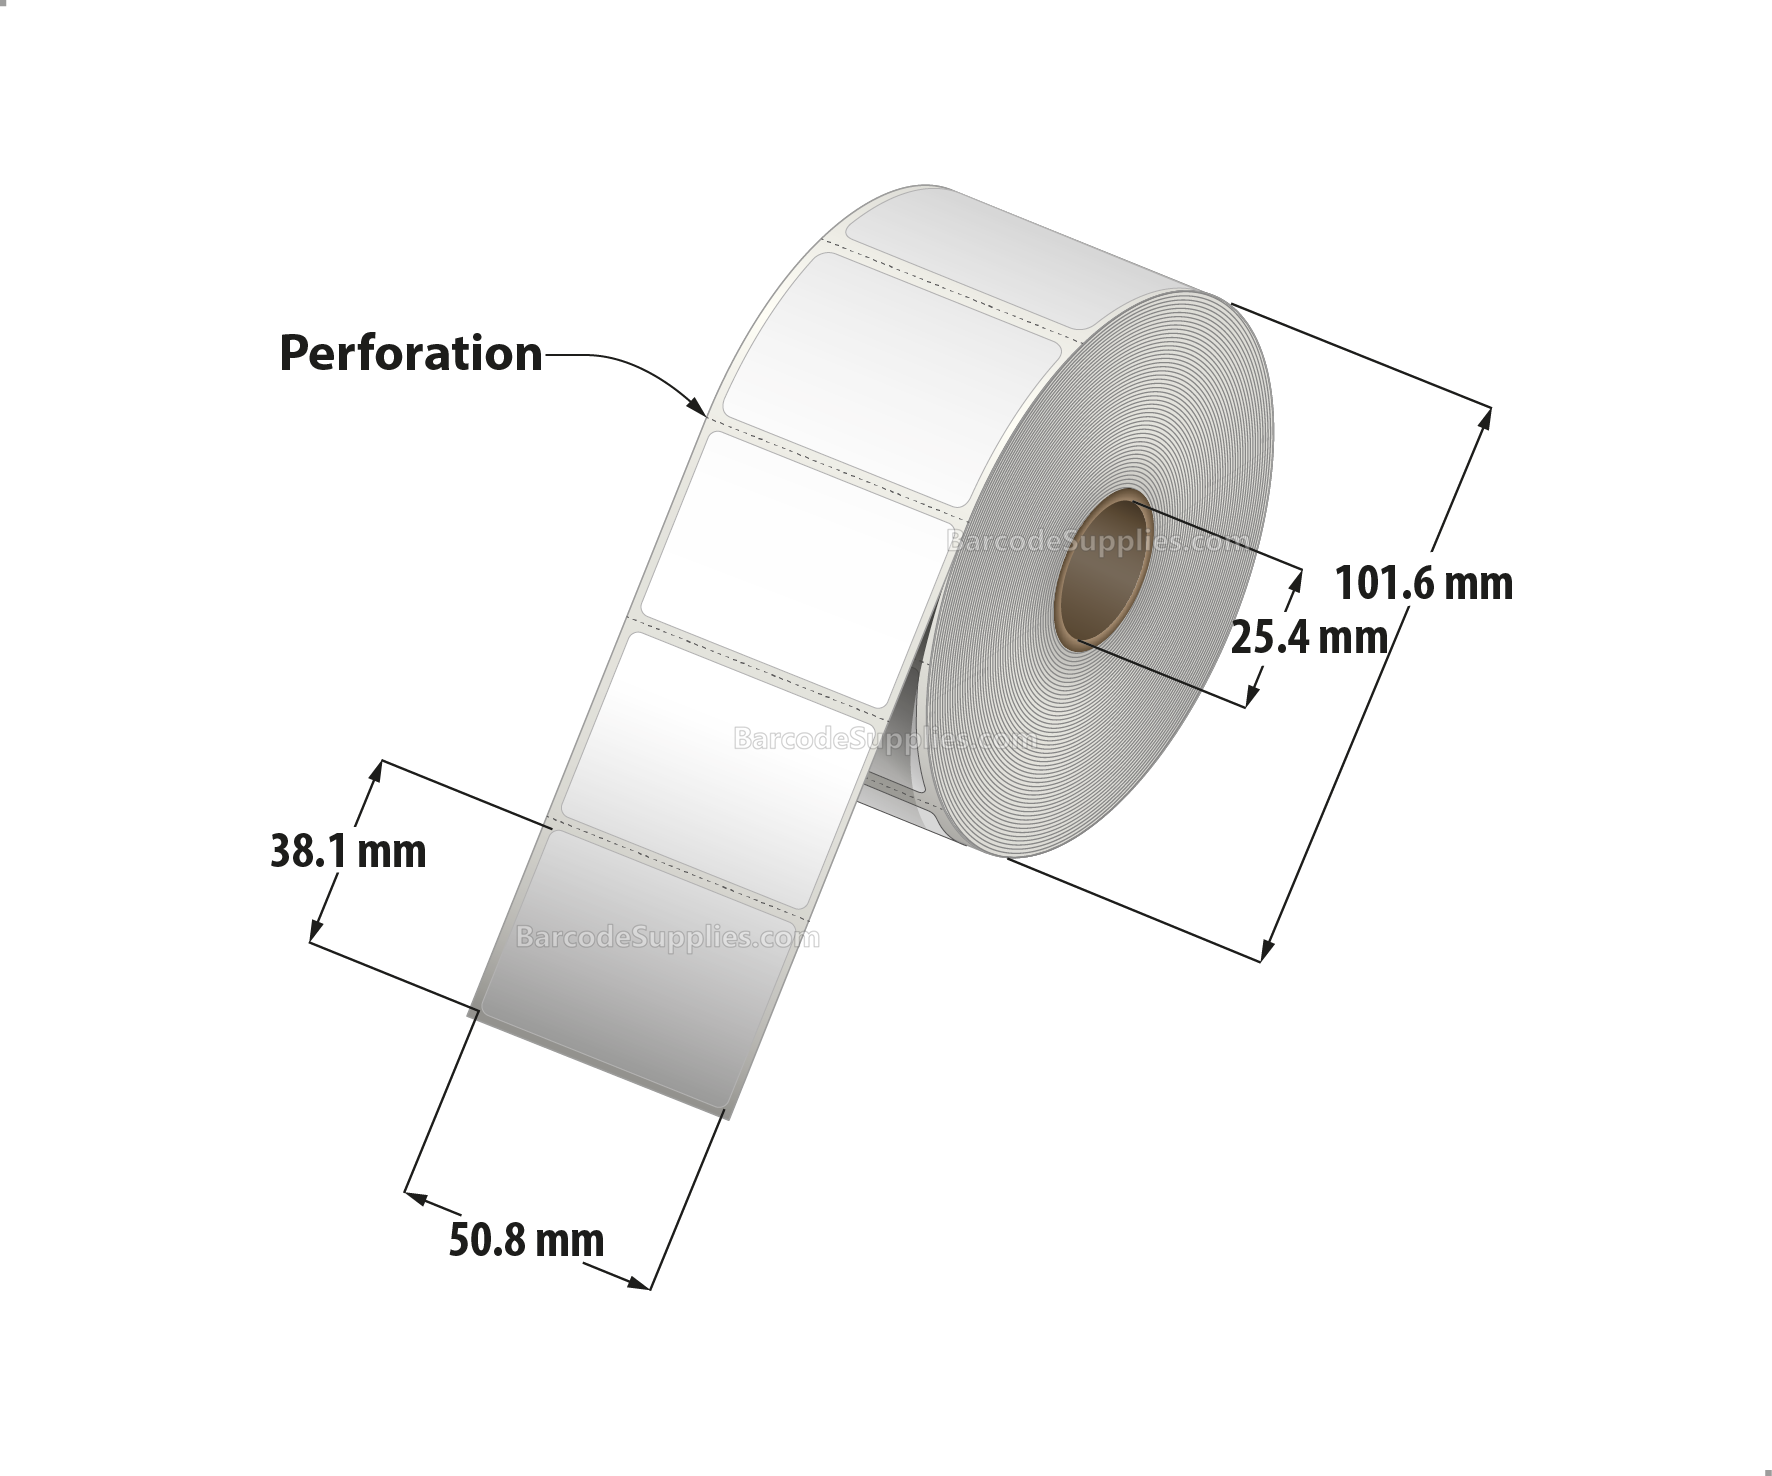 2 x 1.5 Direct Thermal White Labels With Acrylic Adhesive - Perforated - 960 Labels Per Roll - Carton Of 12 Rolls - 11520 Labels Total - MPN: RD-2-15-960-1